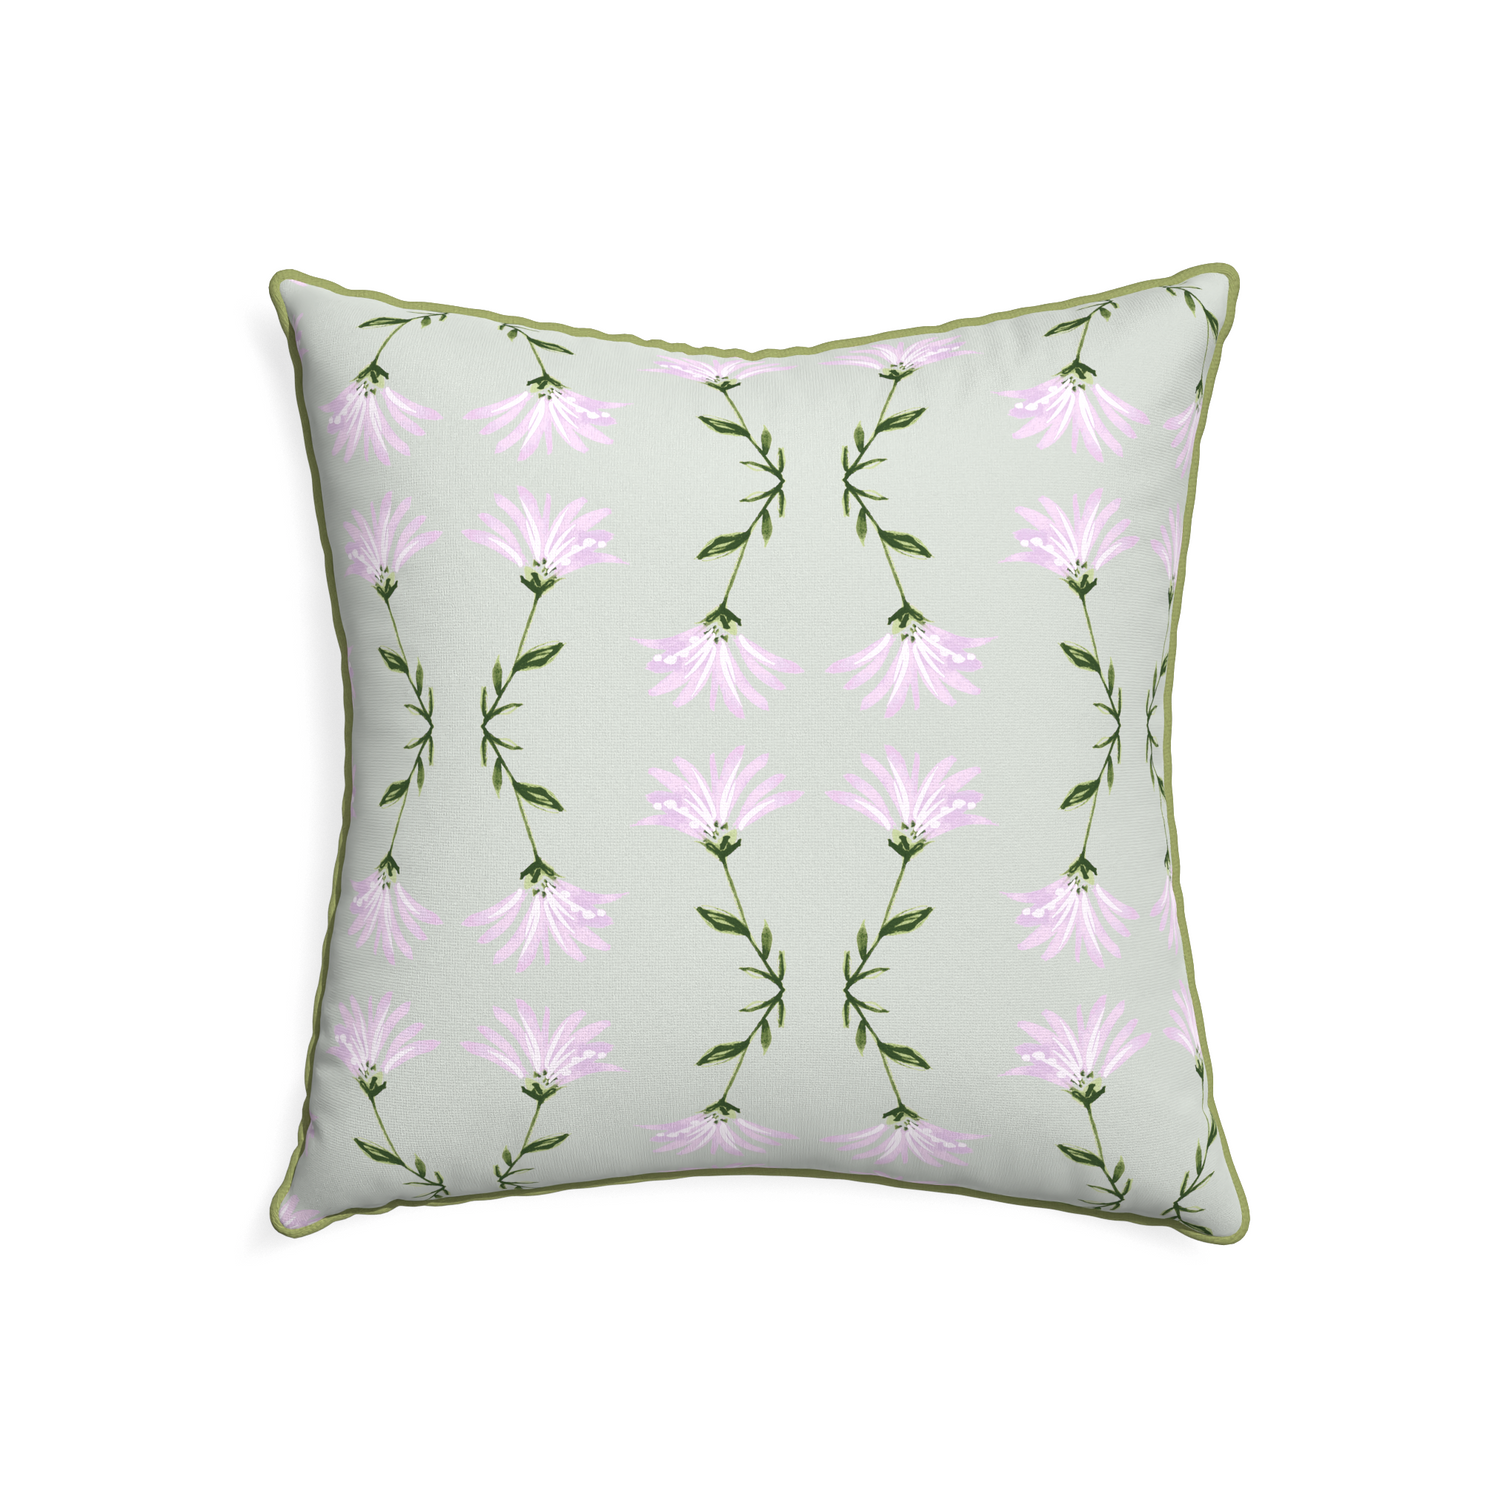 22-square marina sage custom pillow with moss piping on white background